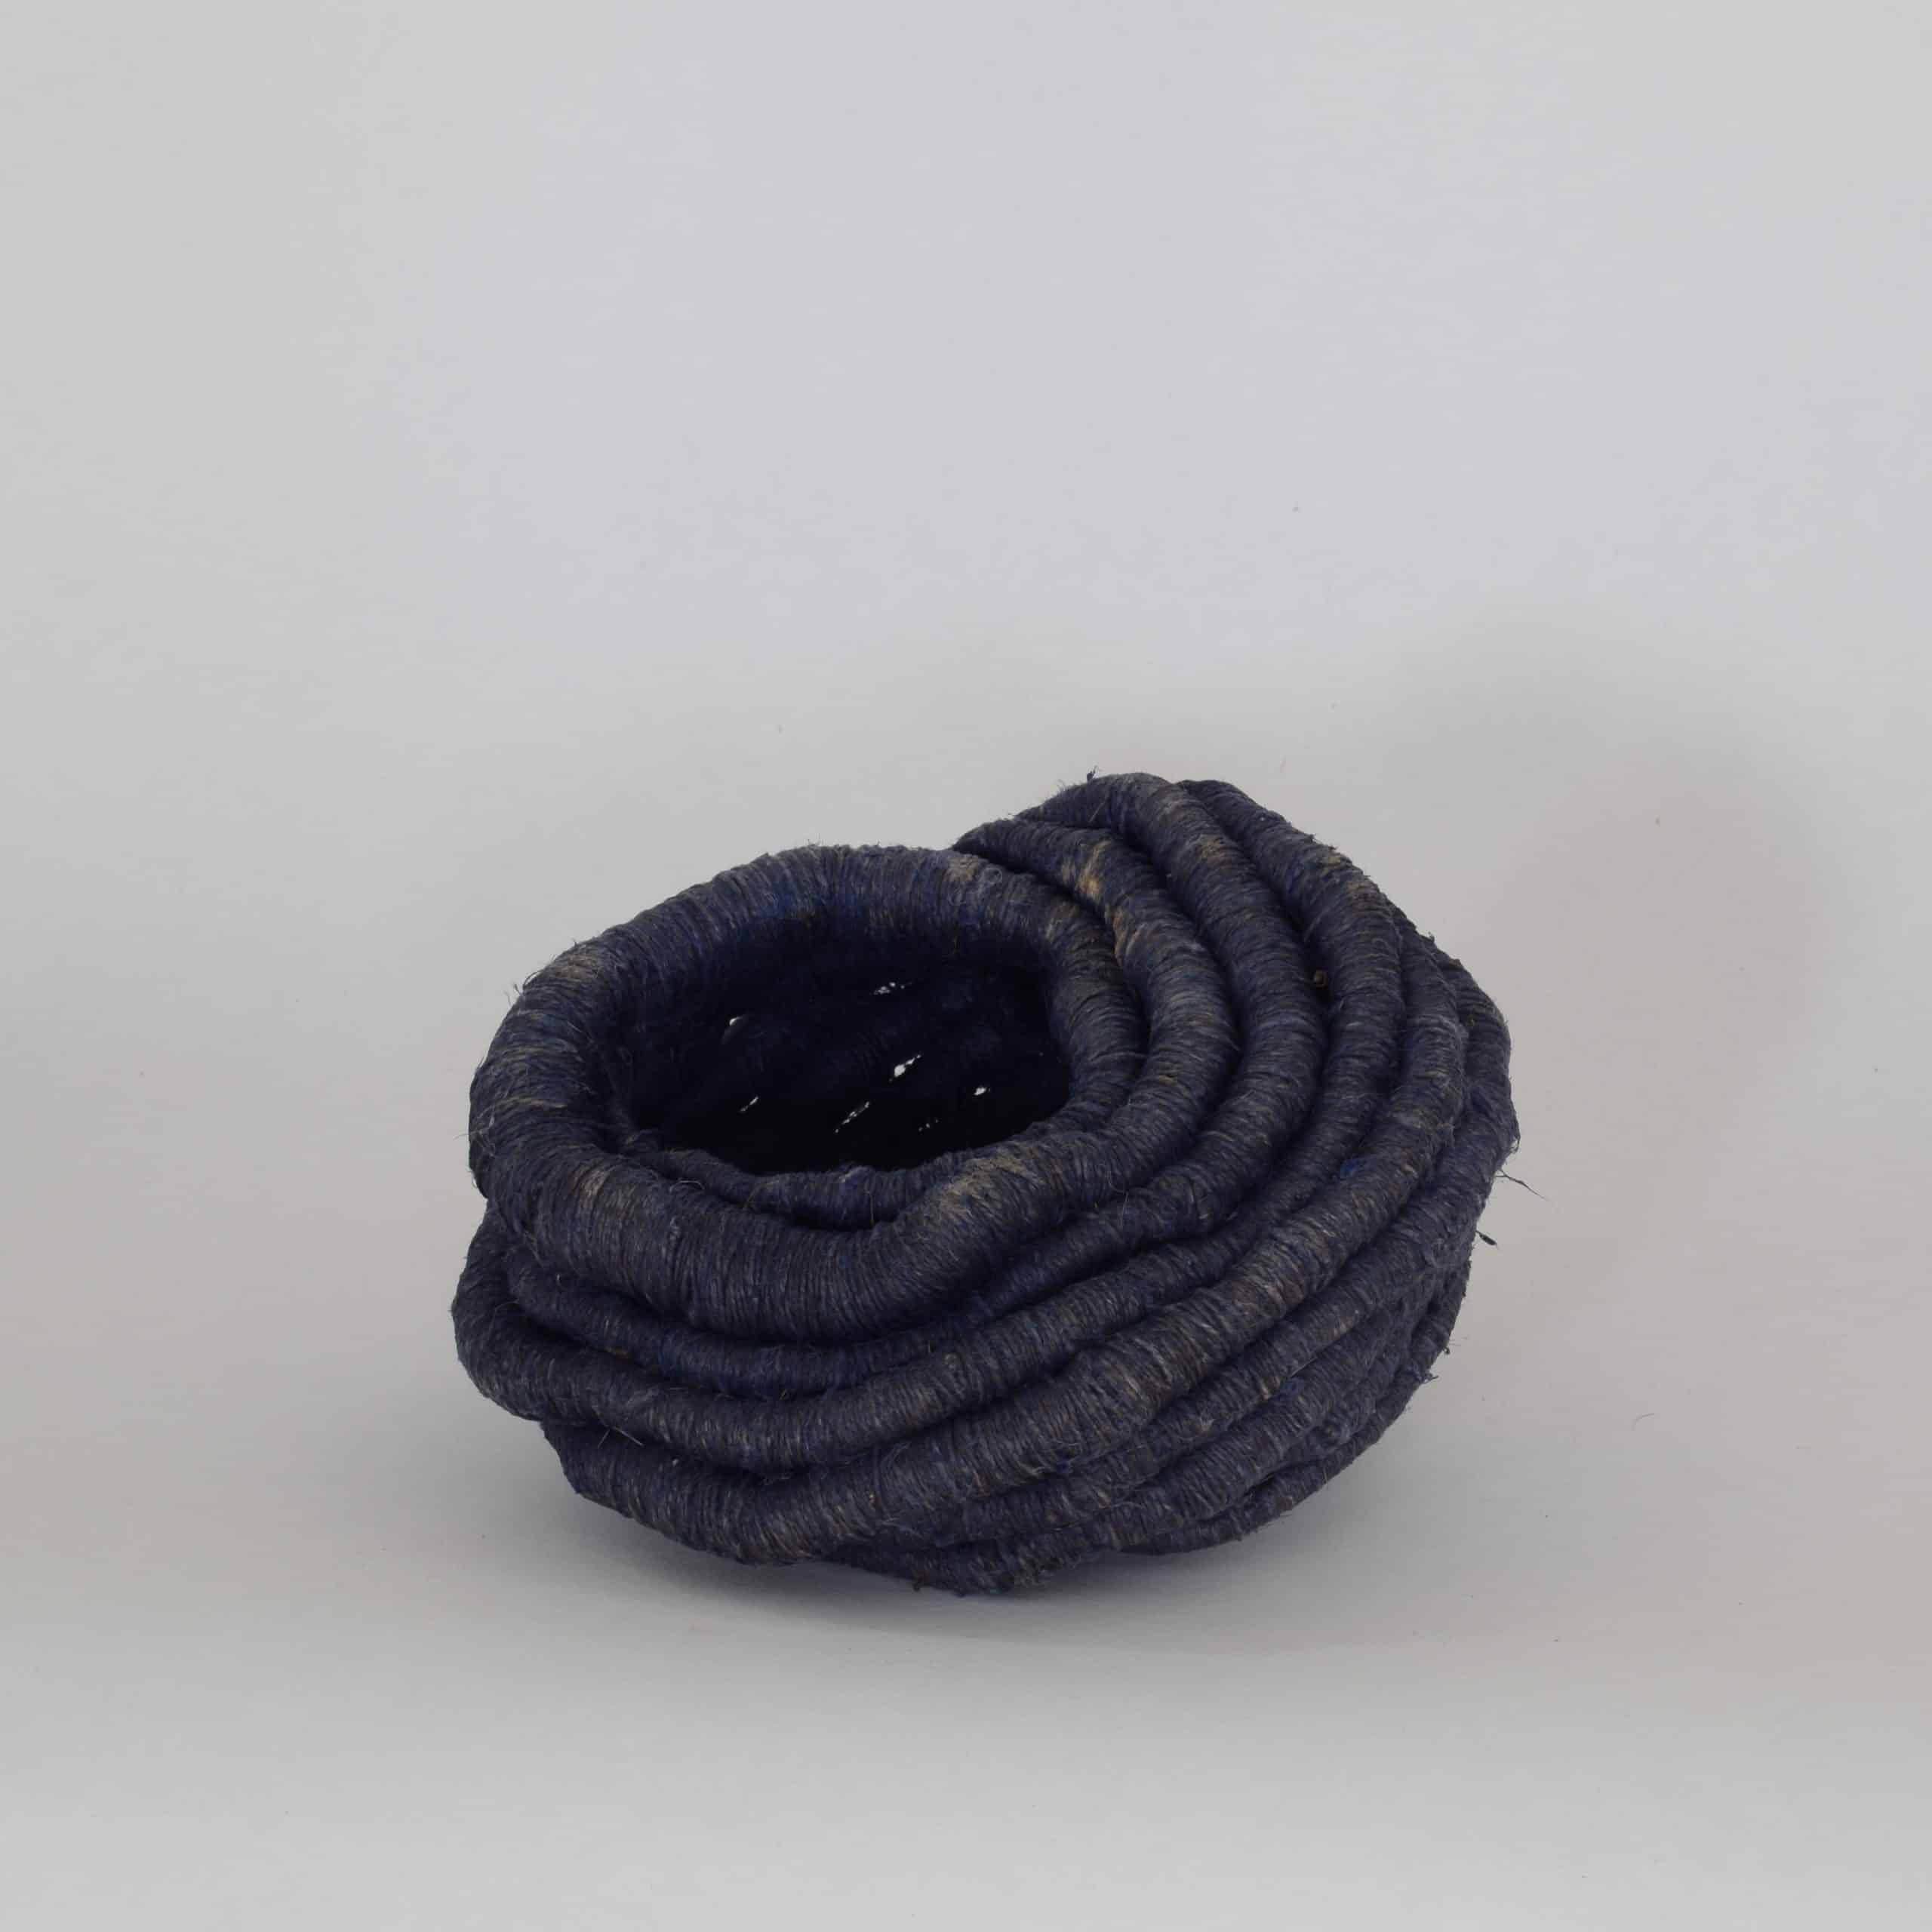 Picture of a navy blue sculpture by Aude Franjou